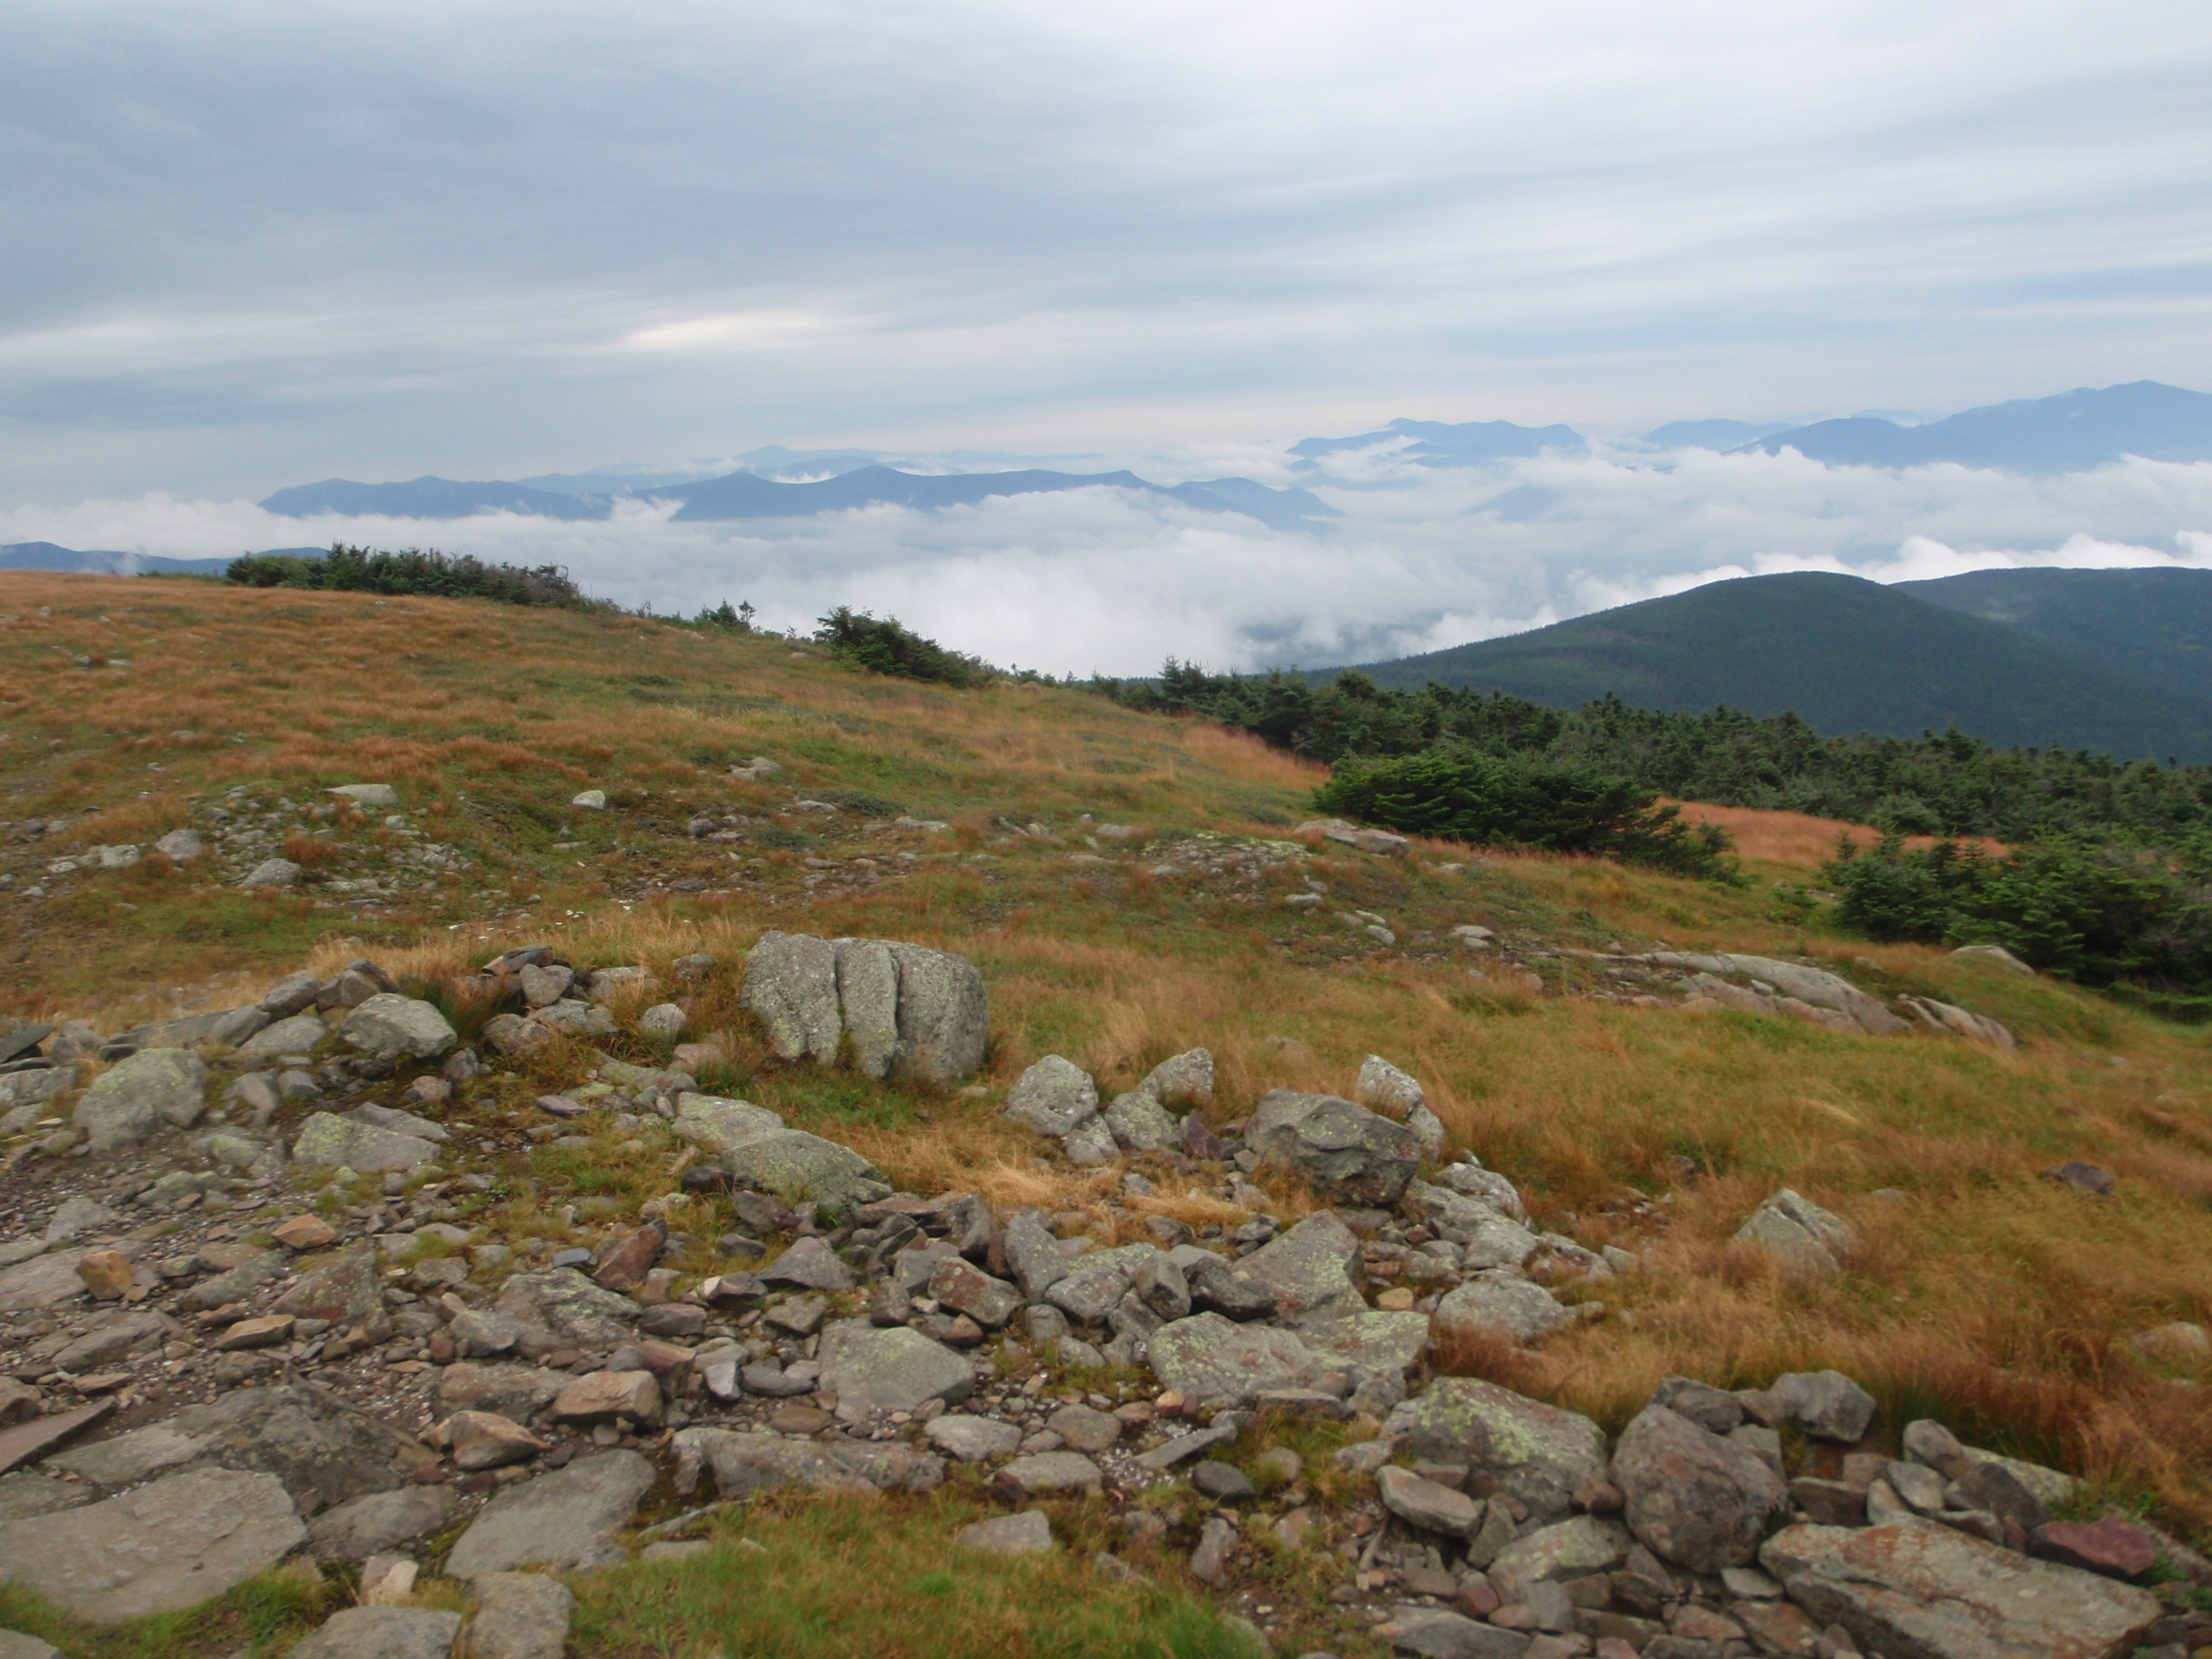 Photograph showing part of the summit of Mount Moosilauke in New Hampshire.